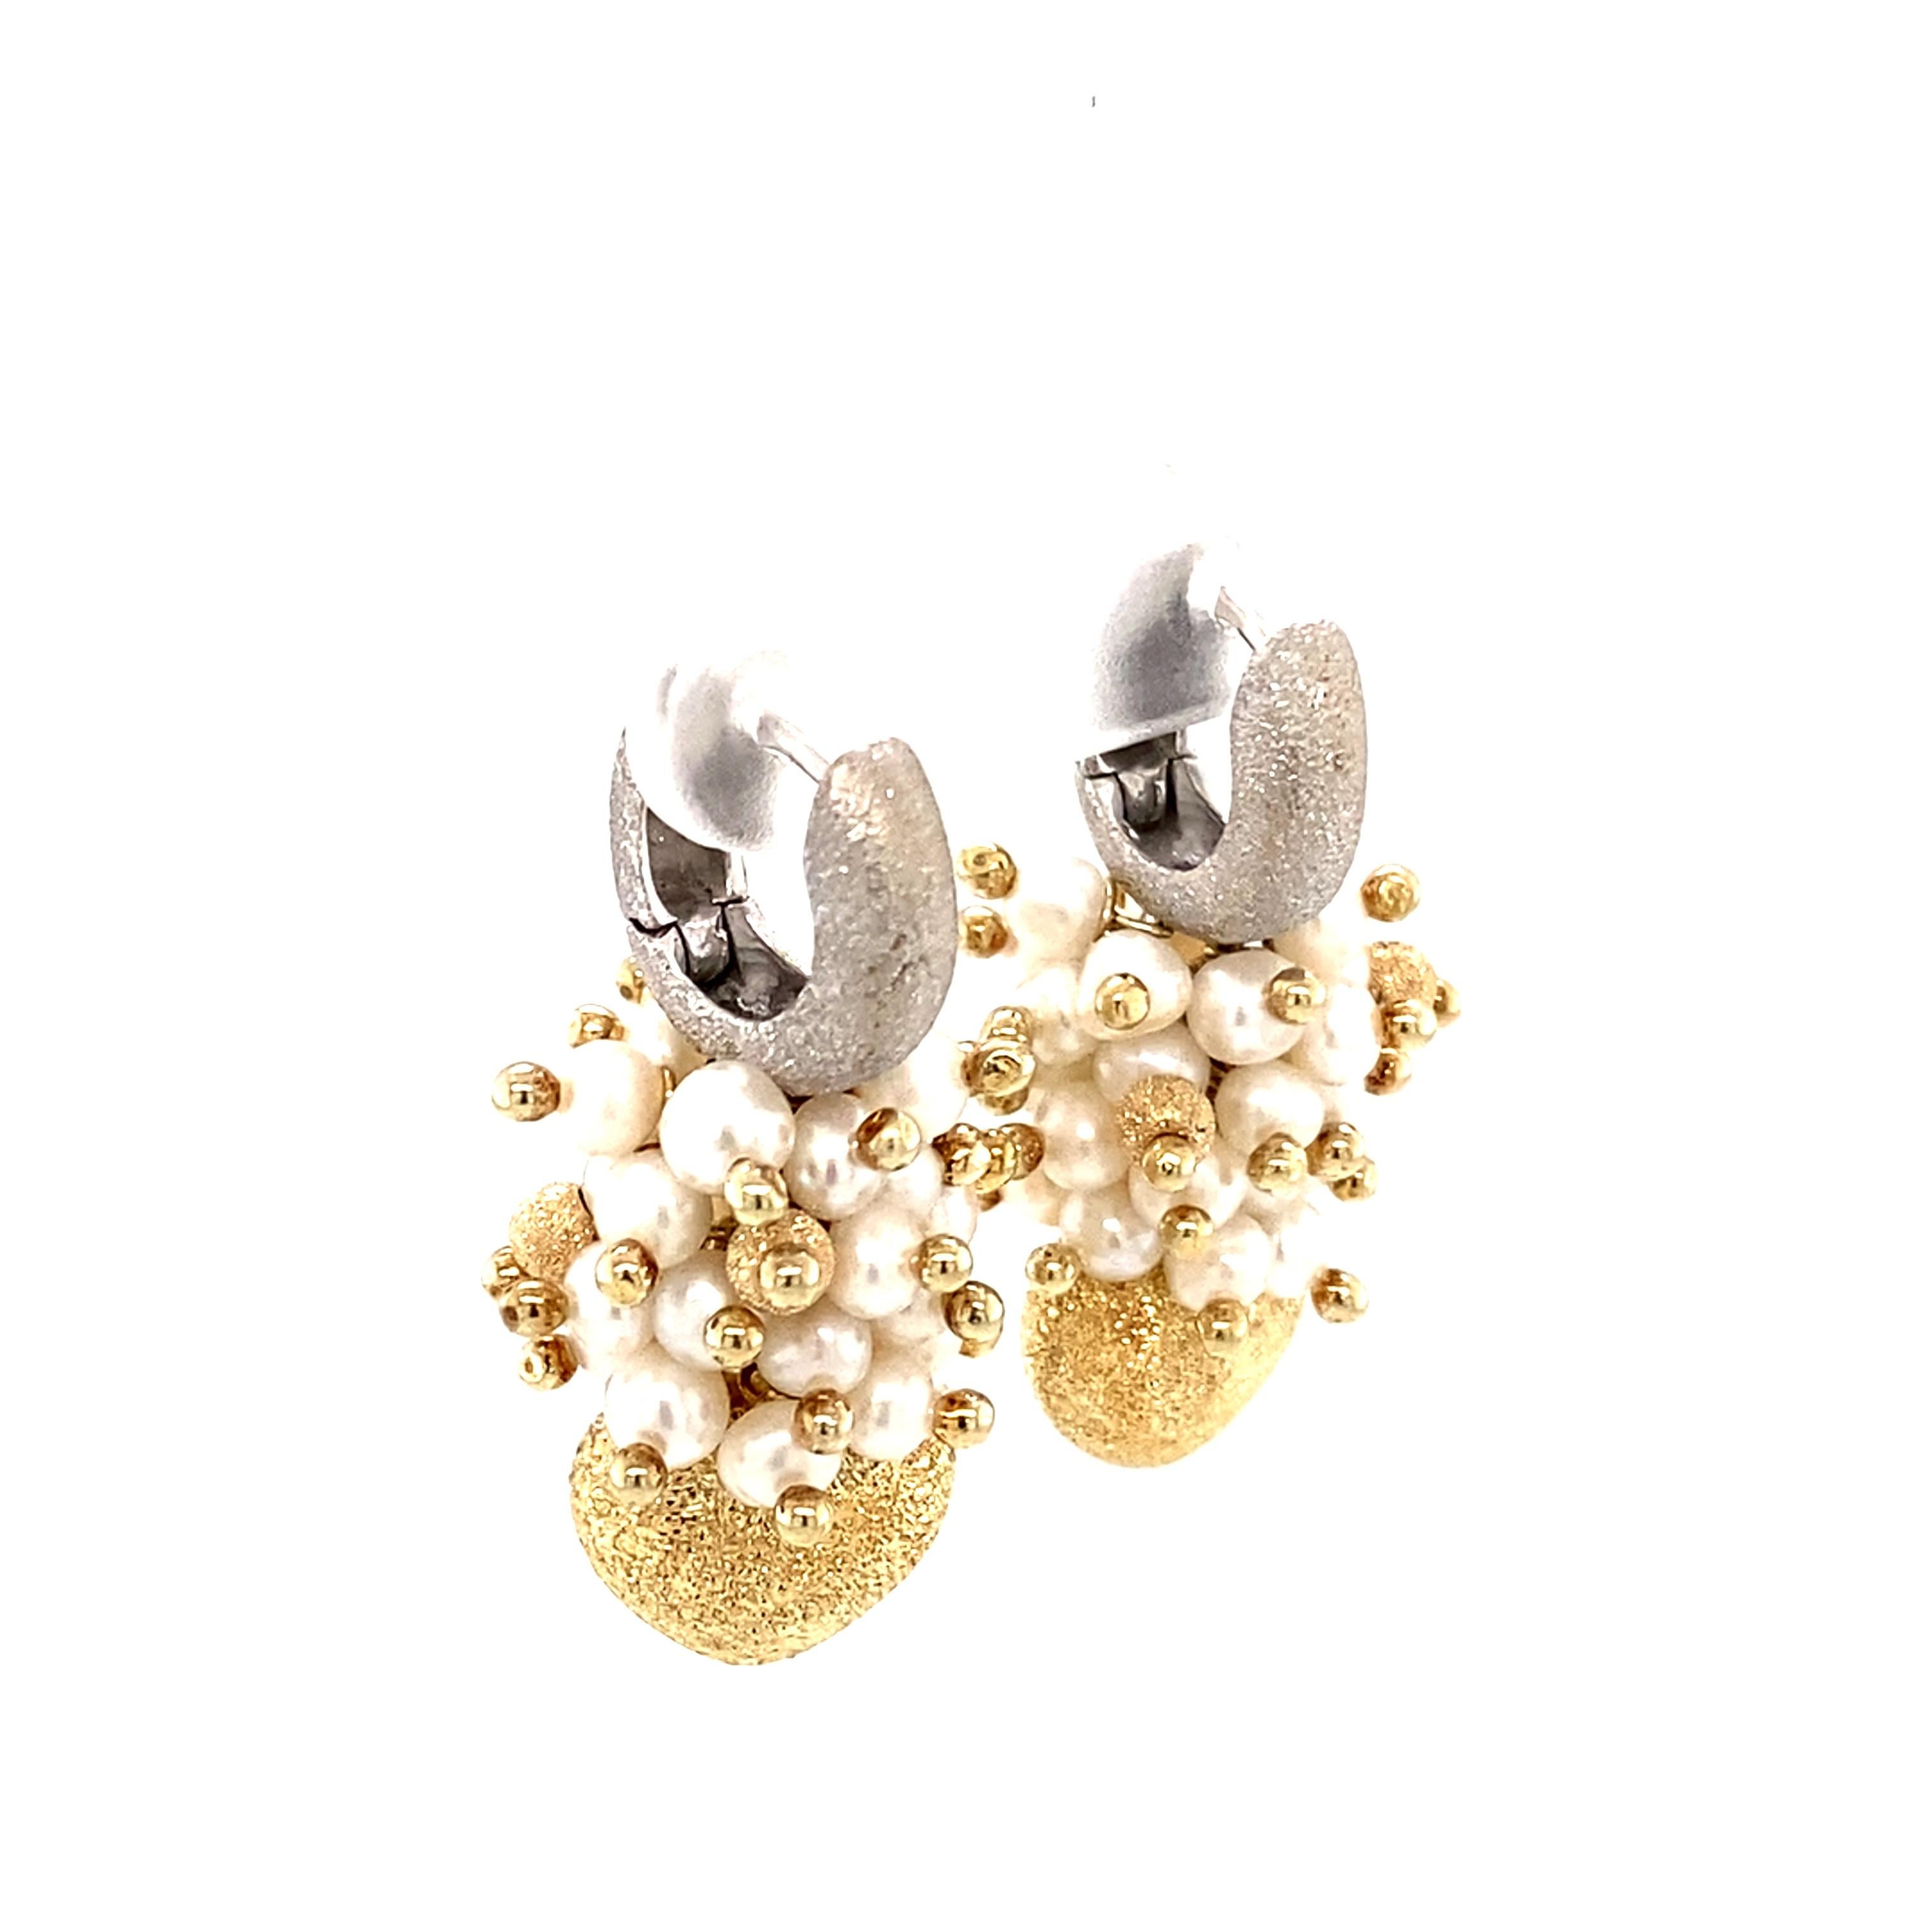 Beautiful Retro earrings featuring Seed Pearl Clusters and 14 karat two tone gold 
Hallmarked 14K 